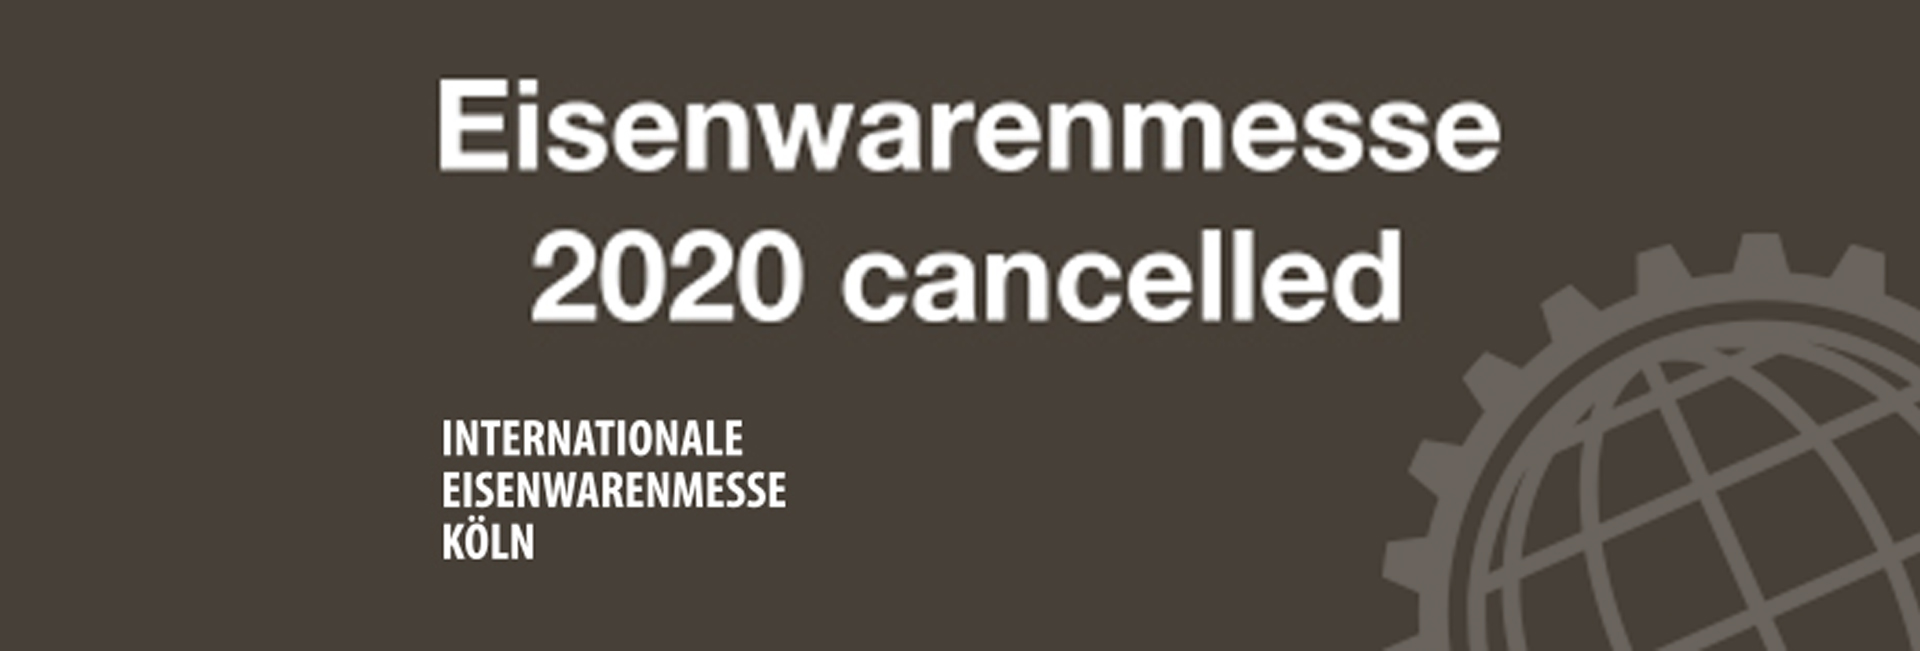 Eisenwarenmesse 2020 cancelled